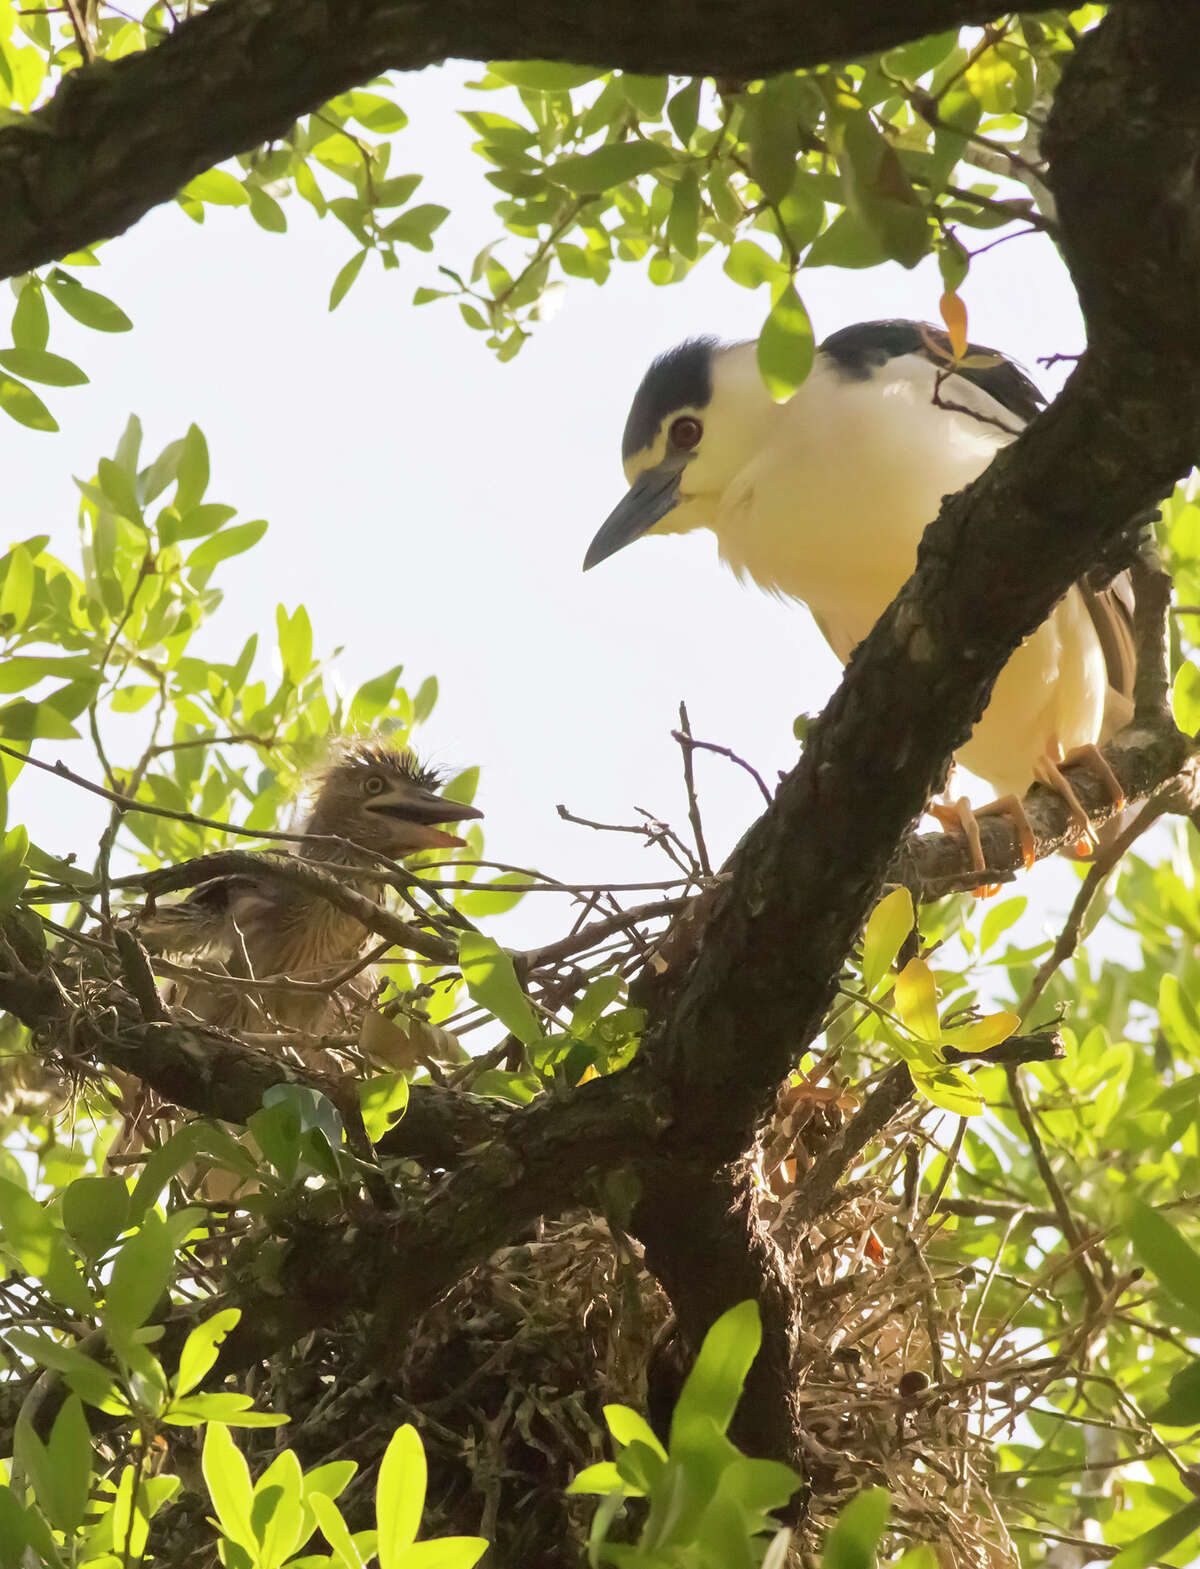 Rice adjunct professor Robert Flatt took up photography after he was diagnosed with Parkinson's disease 12 years ago. Currently, he?•s shooting Black-crowned and Yellow-crowned Night Herons living in the oaks along West Boulevard near Rice University.